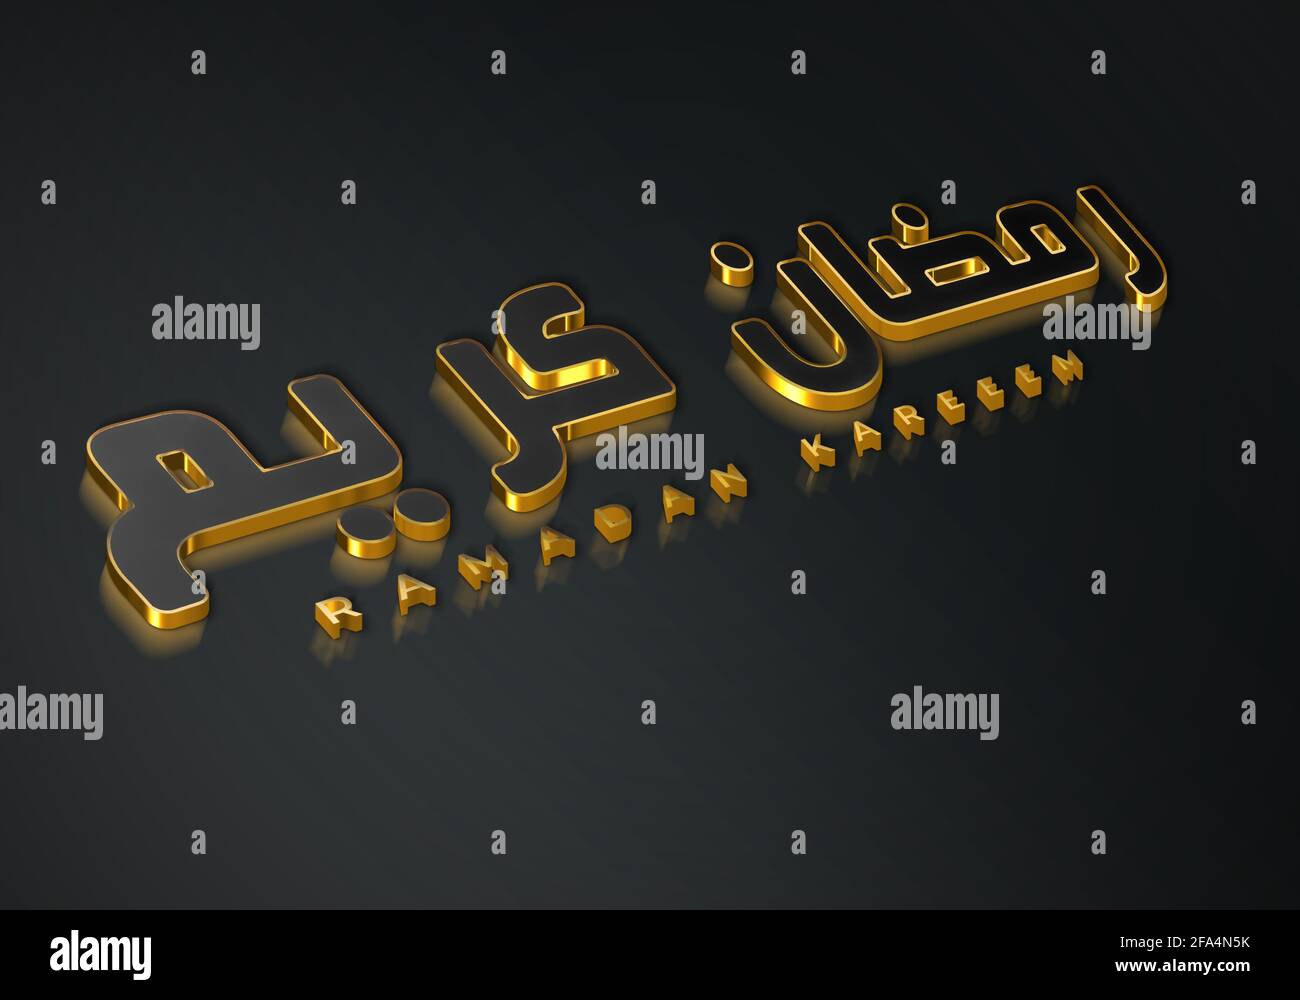 ramadan kareem 3d gold style arabic calligraphy and english lettering 3d rendering Stock Photo